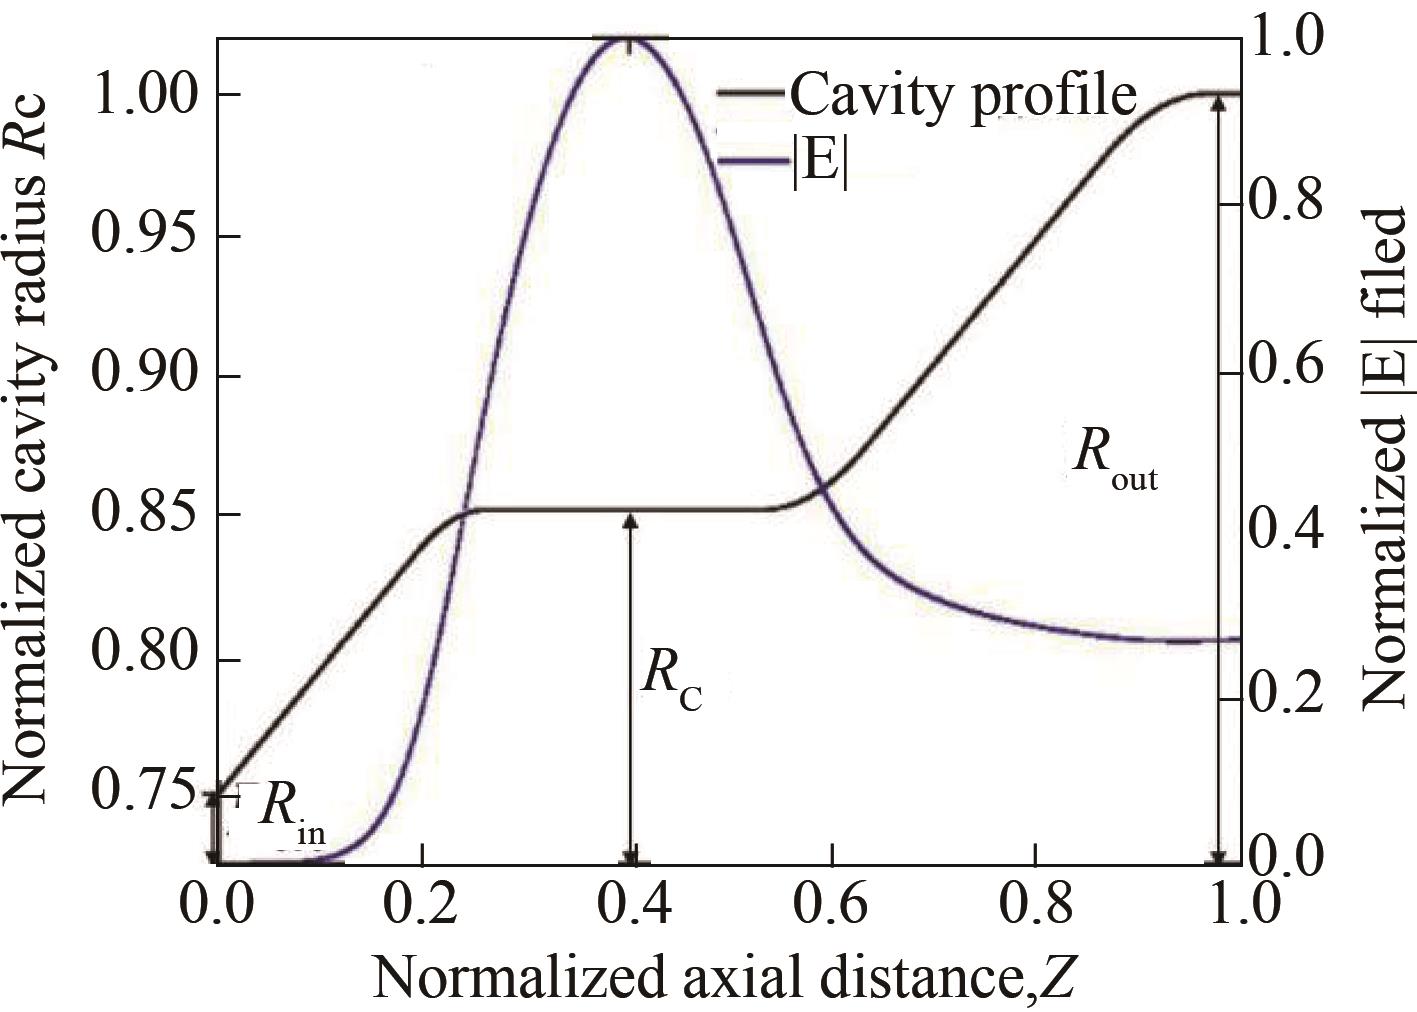 The cavity structure and distribution of electric field relationship